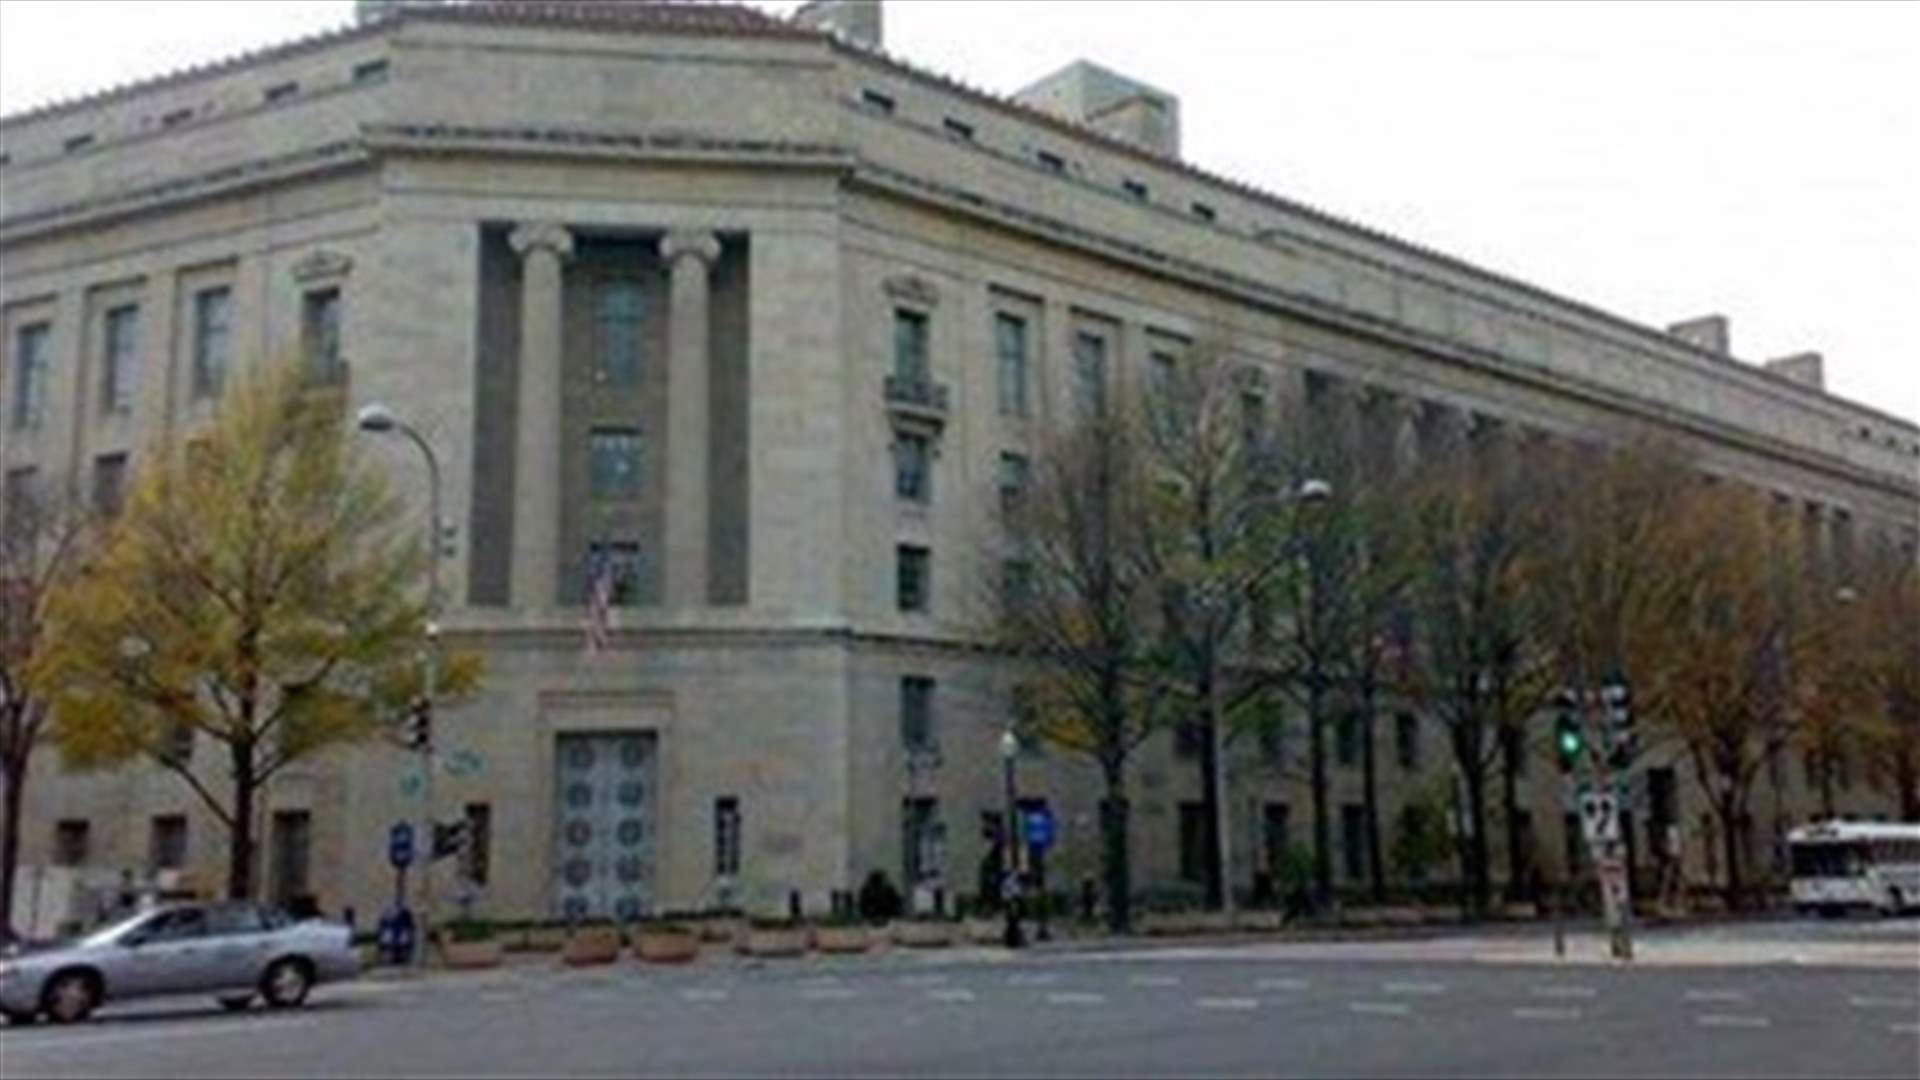 Two arrested for allegedly spying for Iran in US